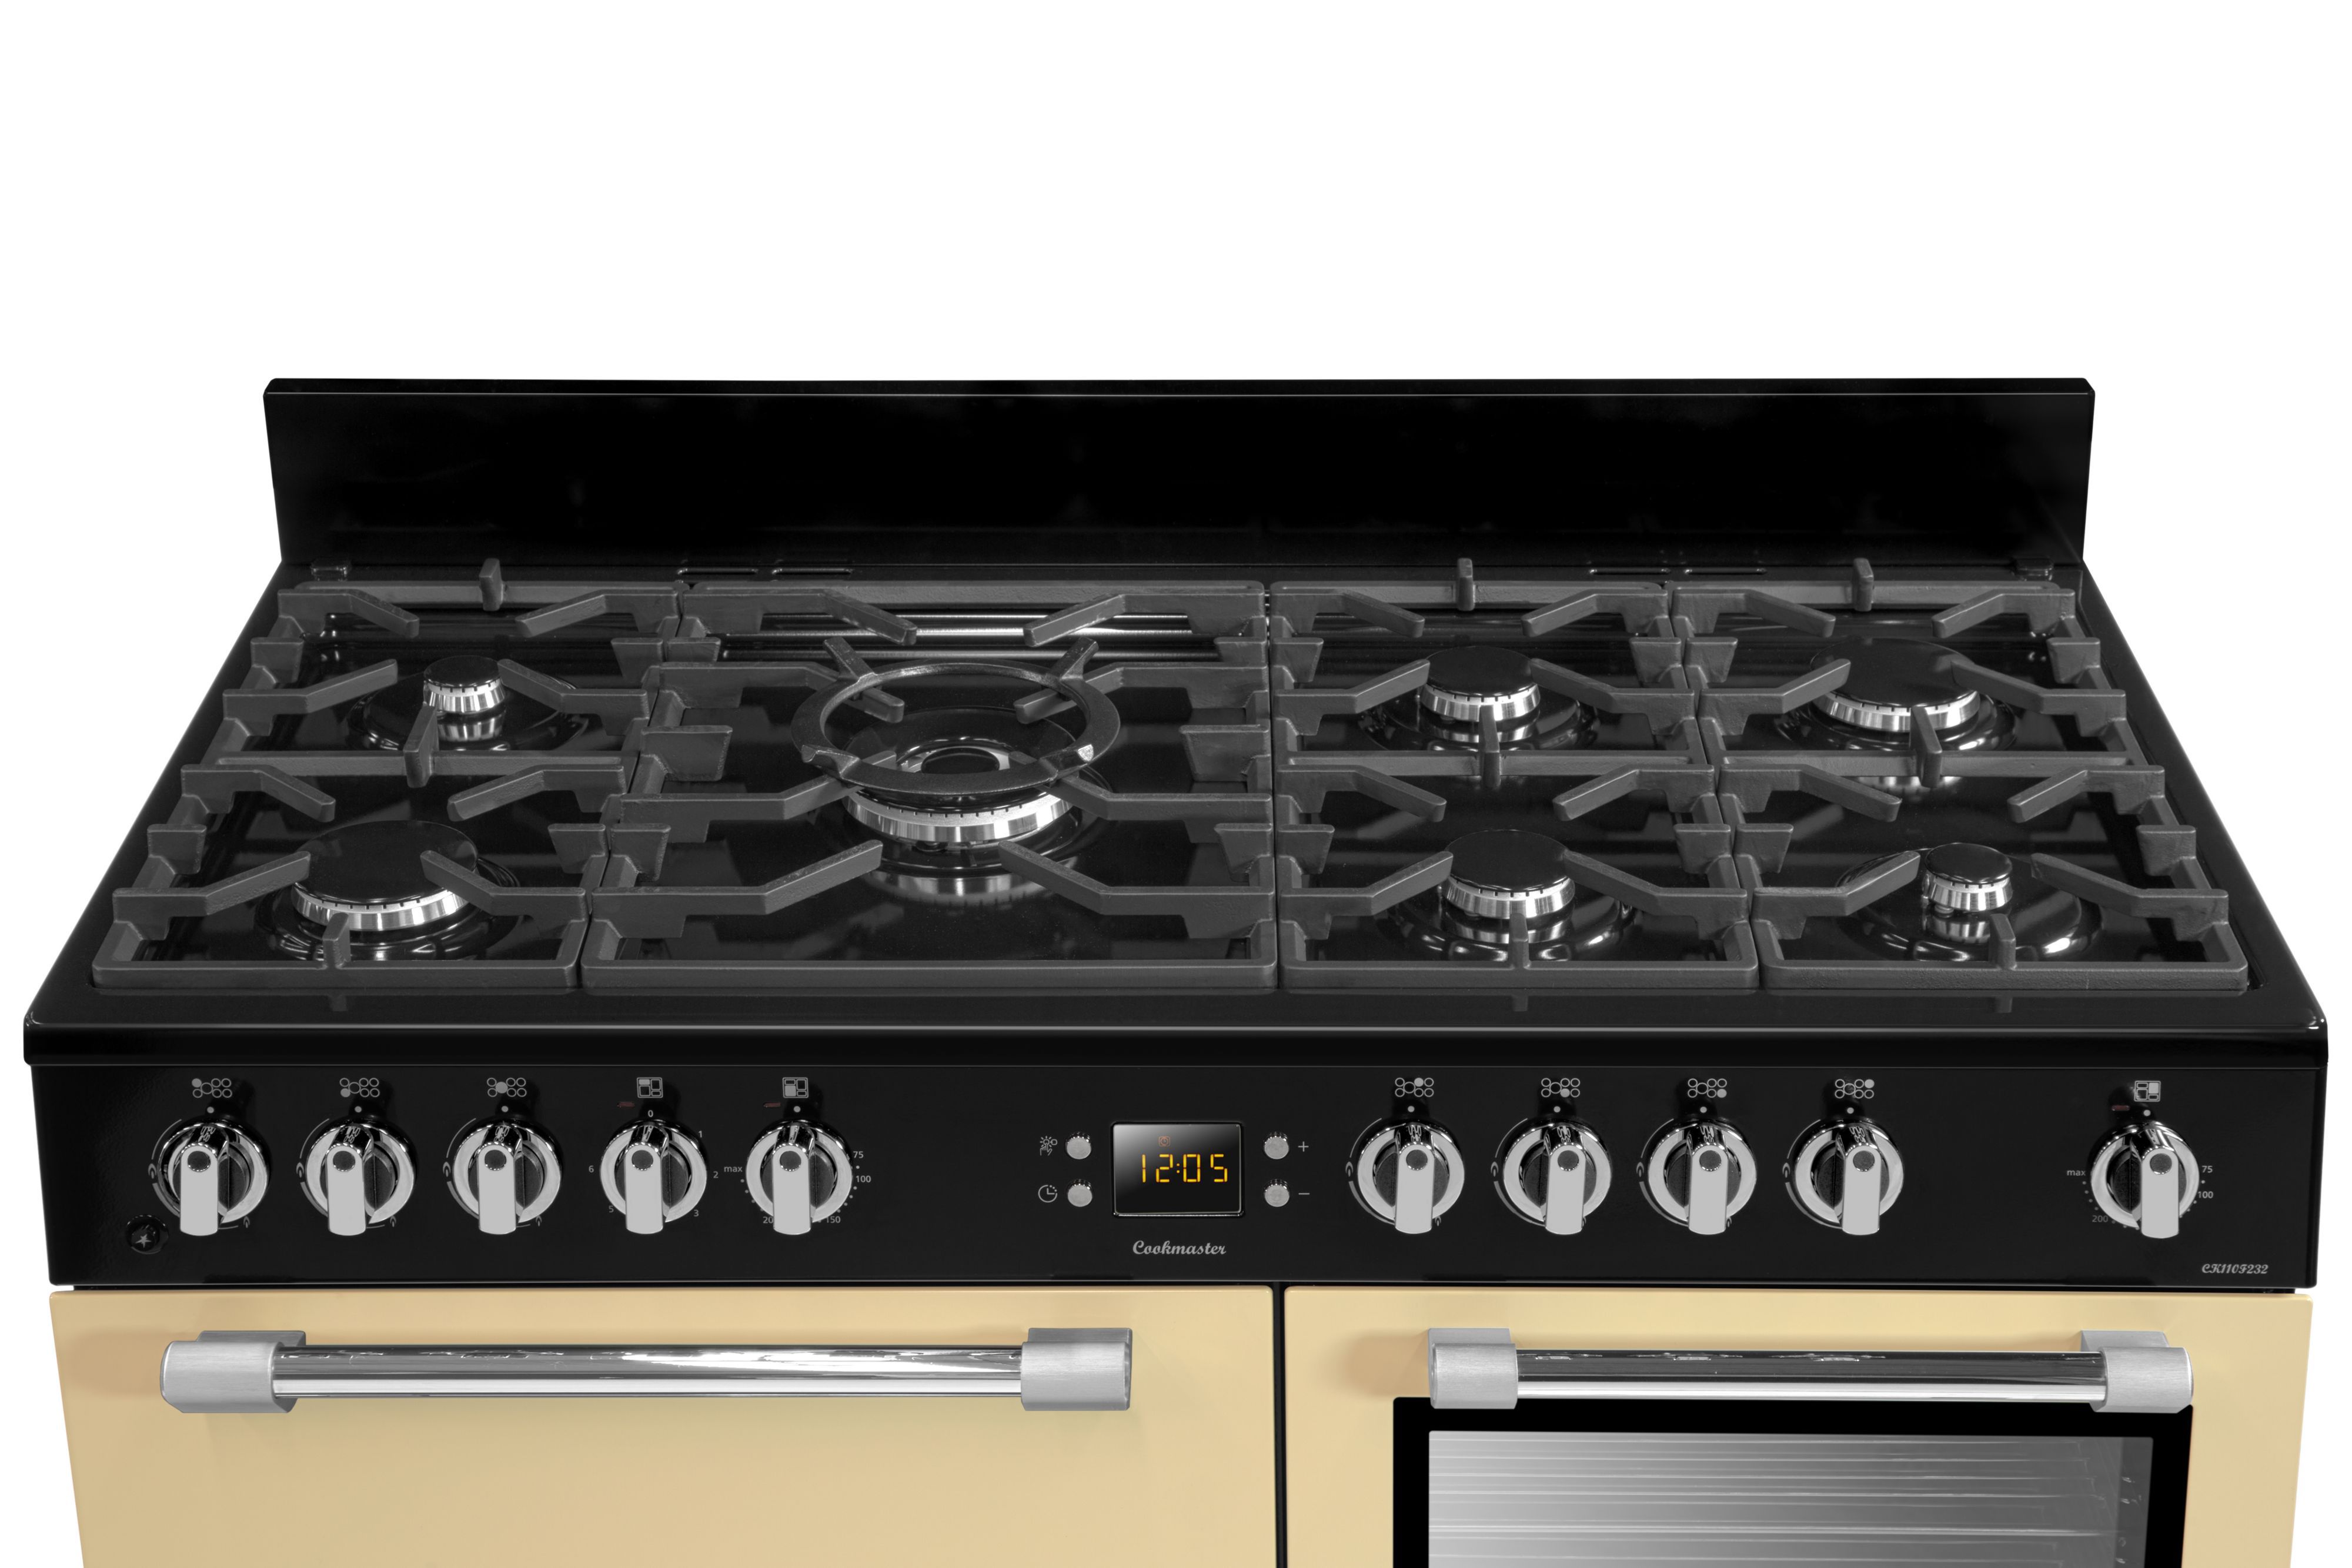 Leisure CK110F232C Freestanding Electric Range cooker with Gas Hob - Cream